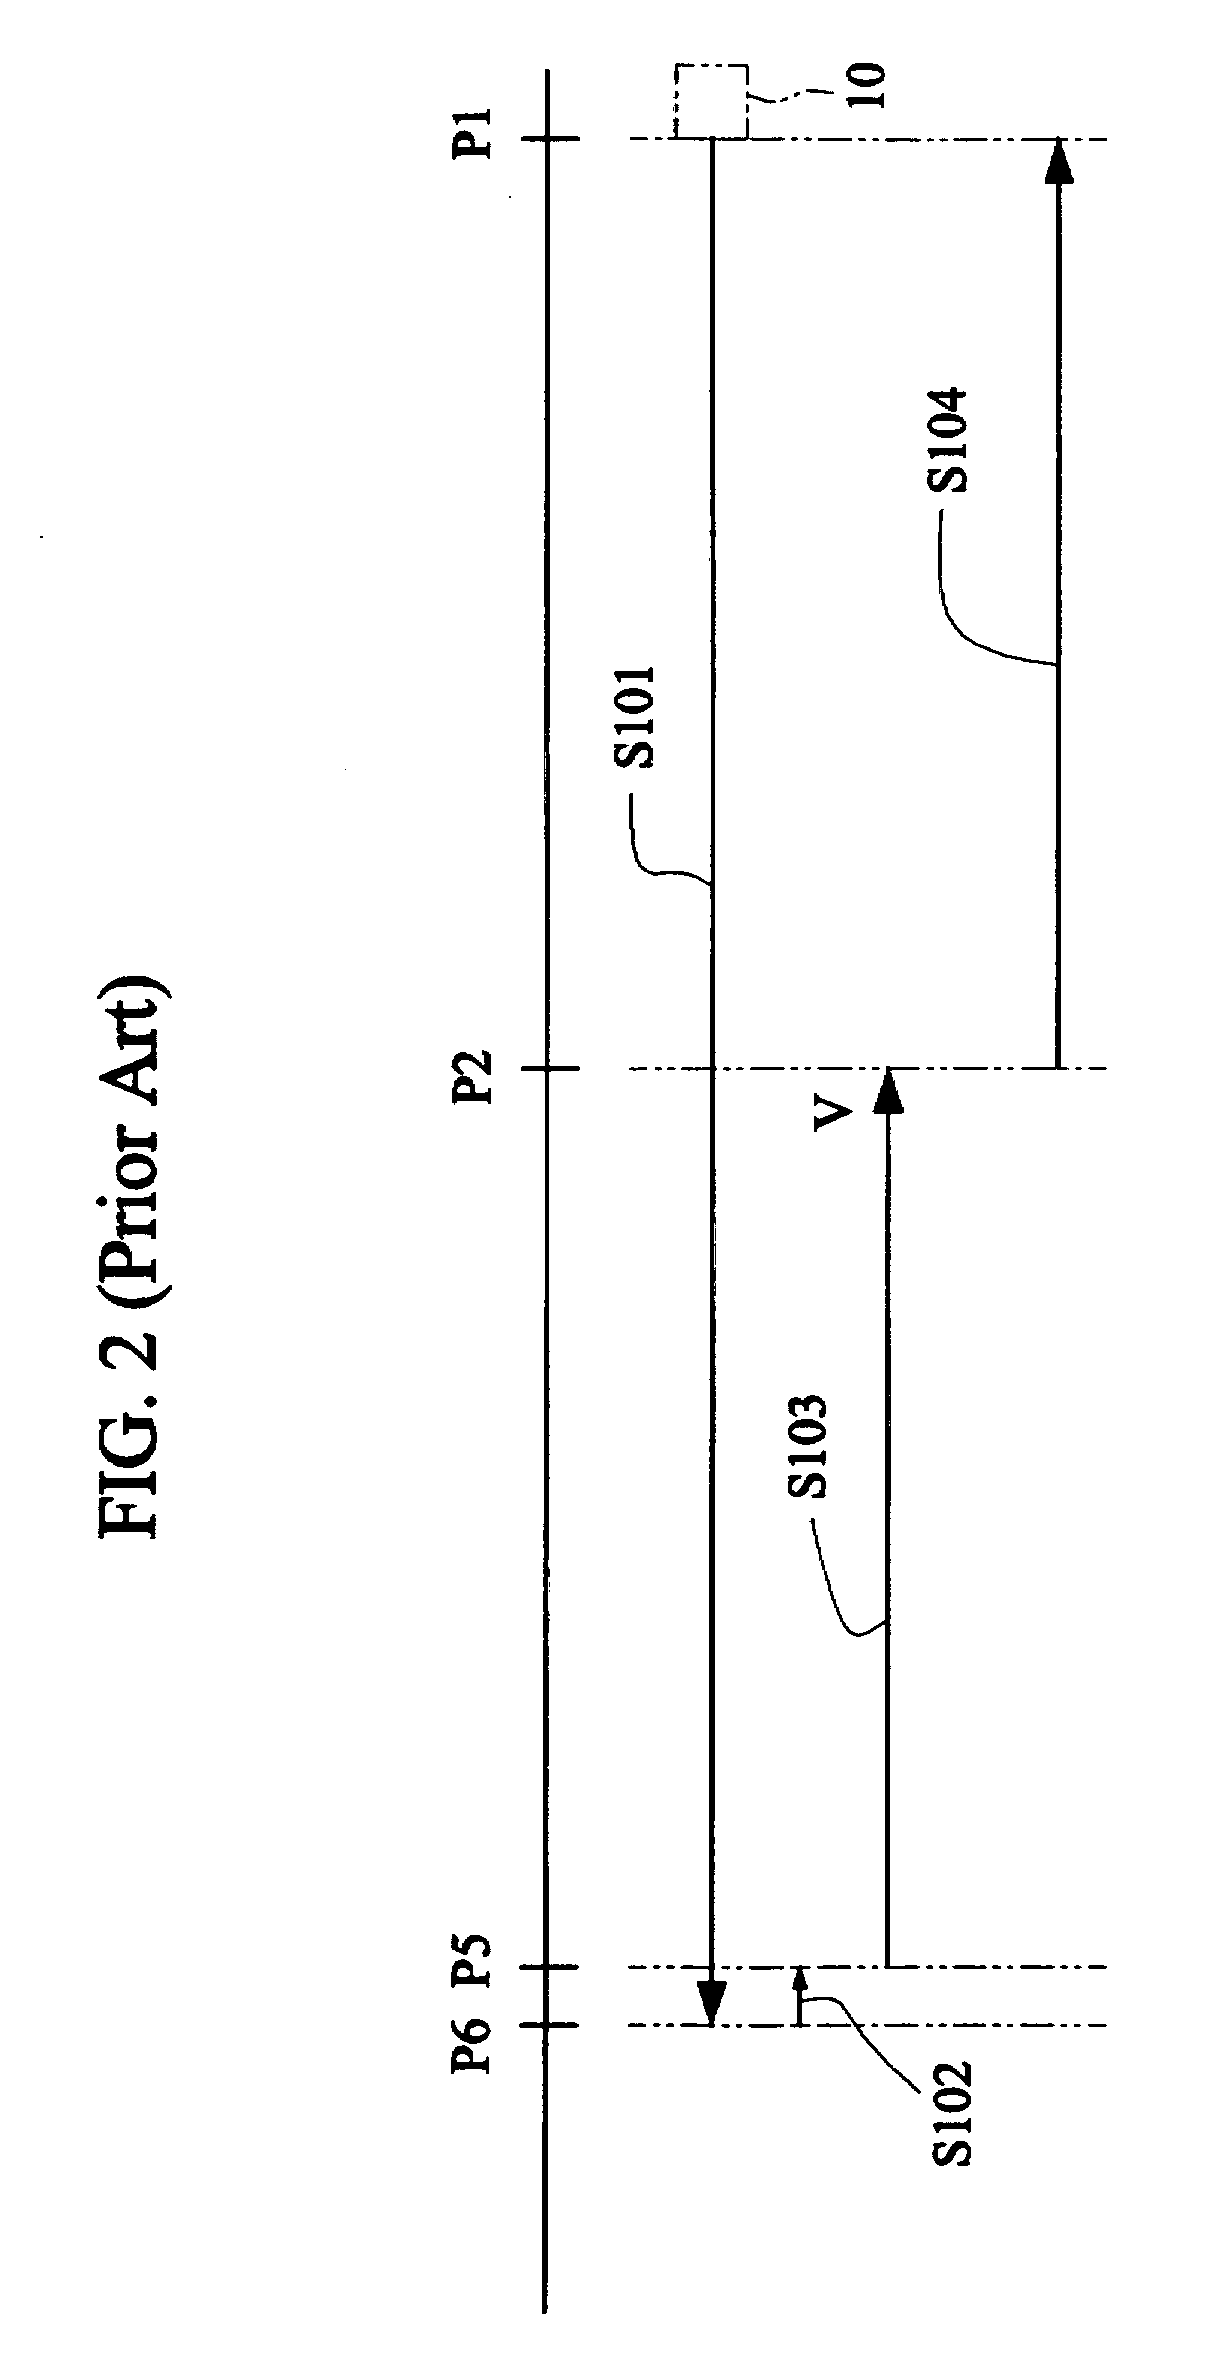 Multi-stage scanning method for increasing scanning speed and enhancing image quality